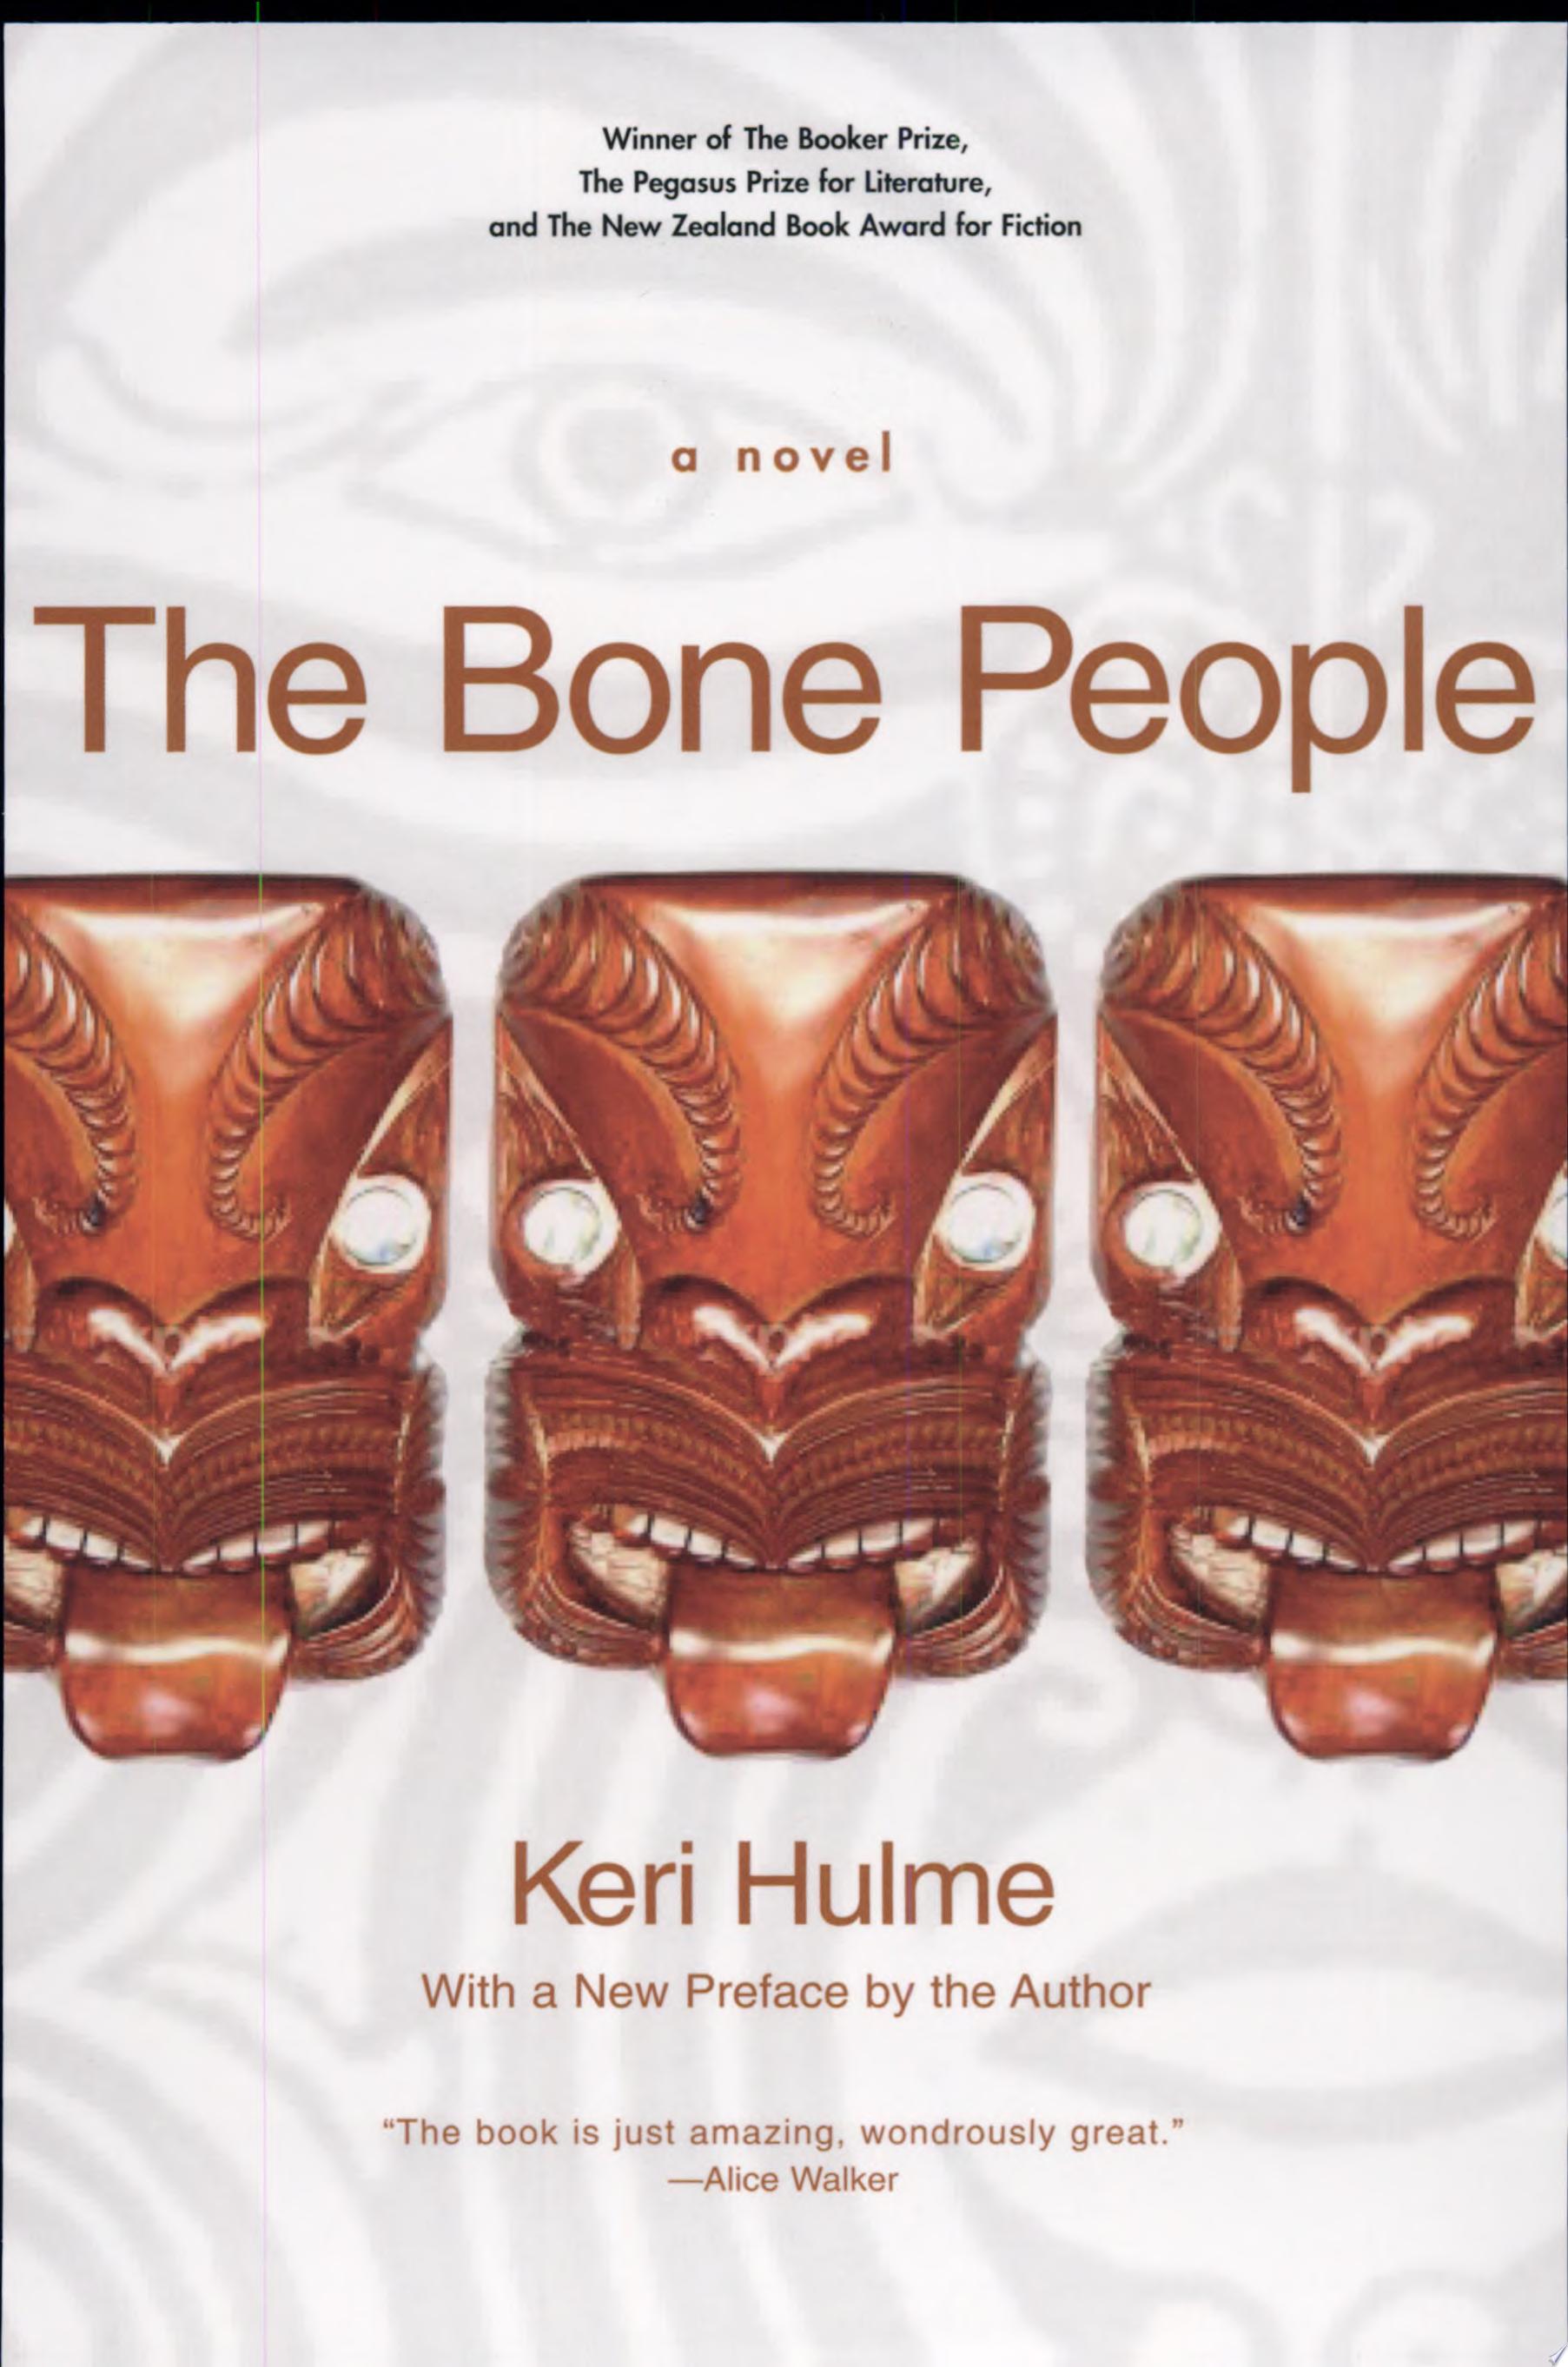 Image for "The Bone People"